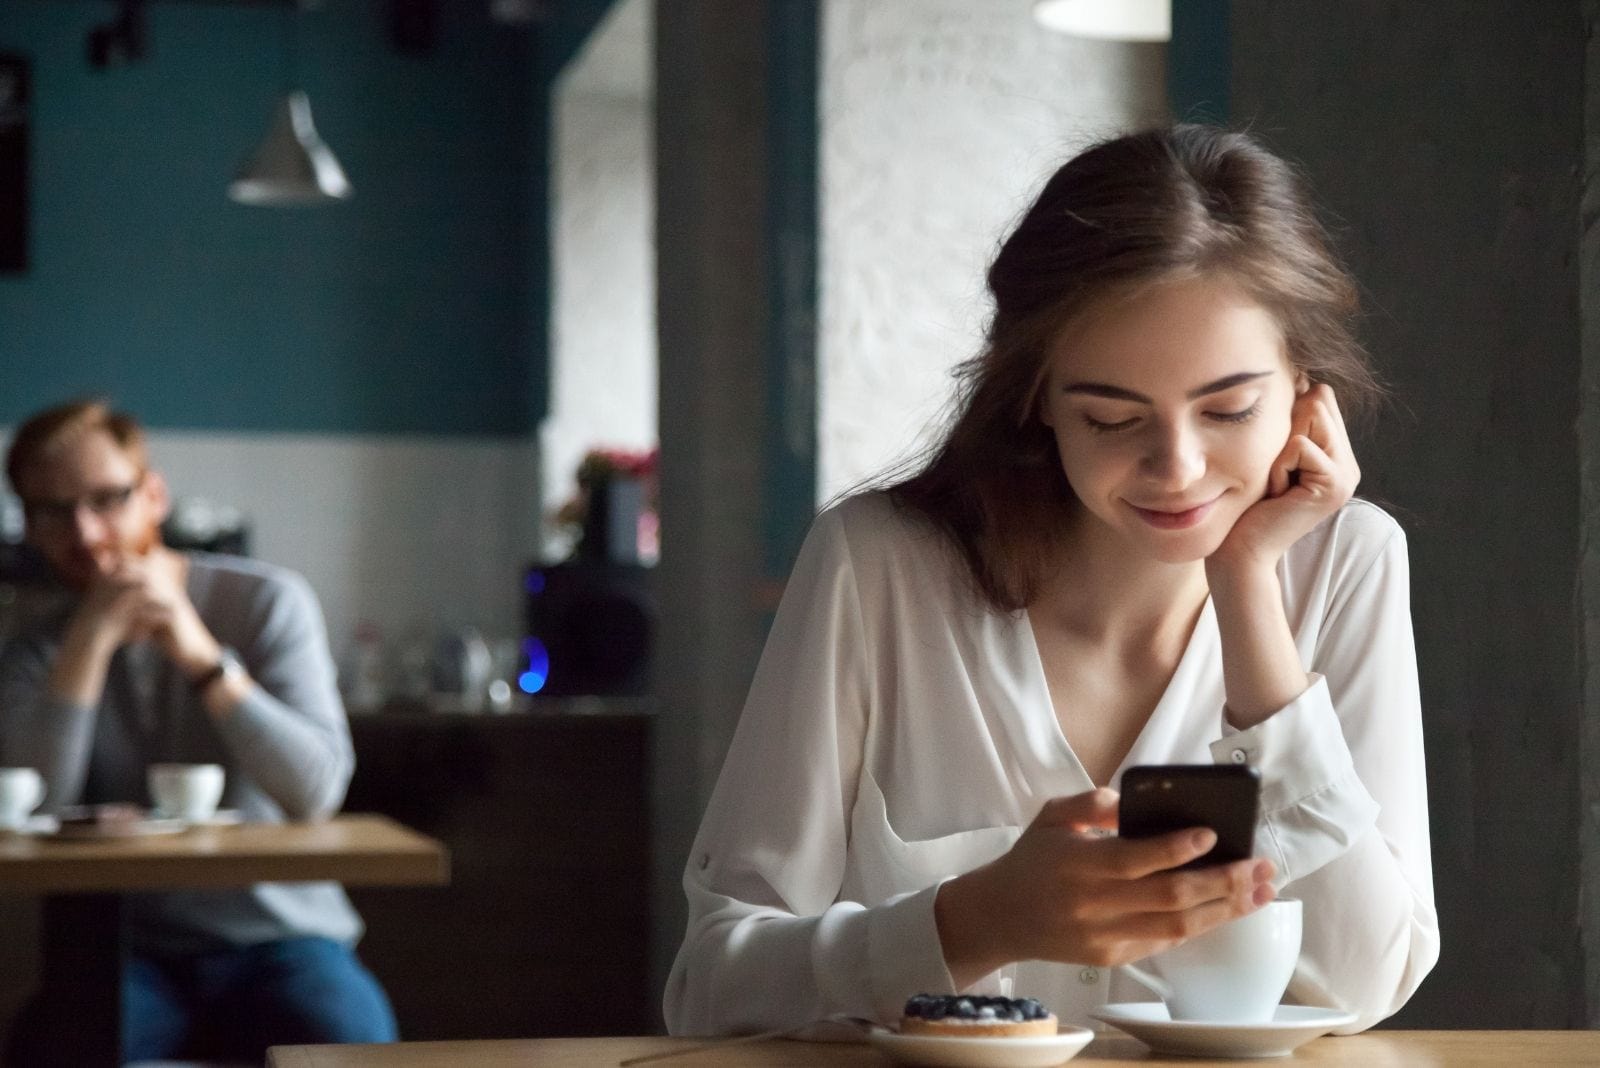 woman staring at her smartphone while smiling inside the cafe with a man at the back staring at her